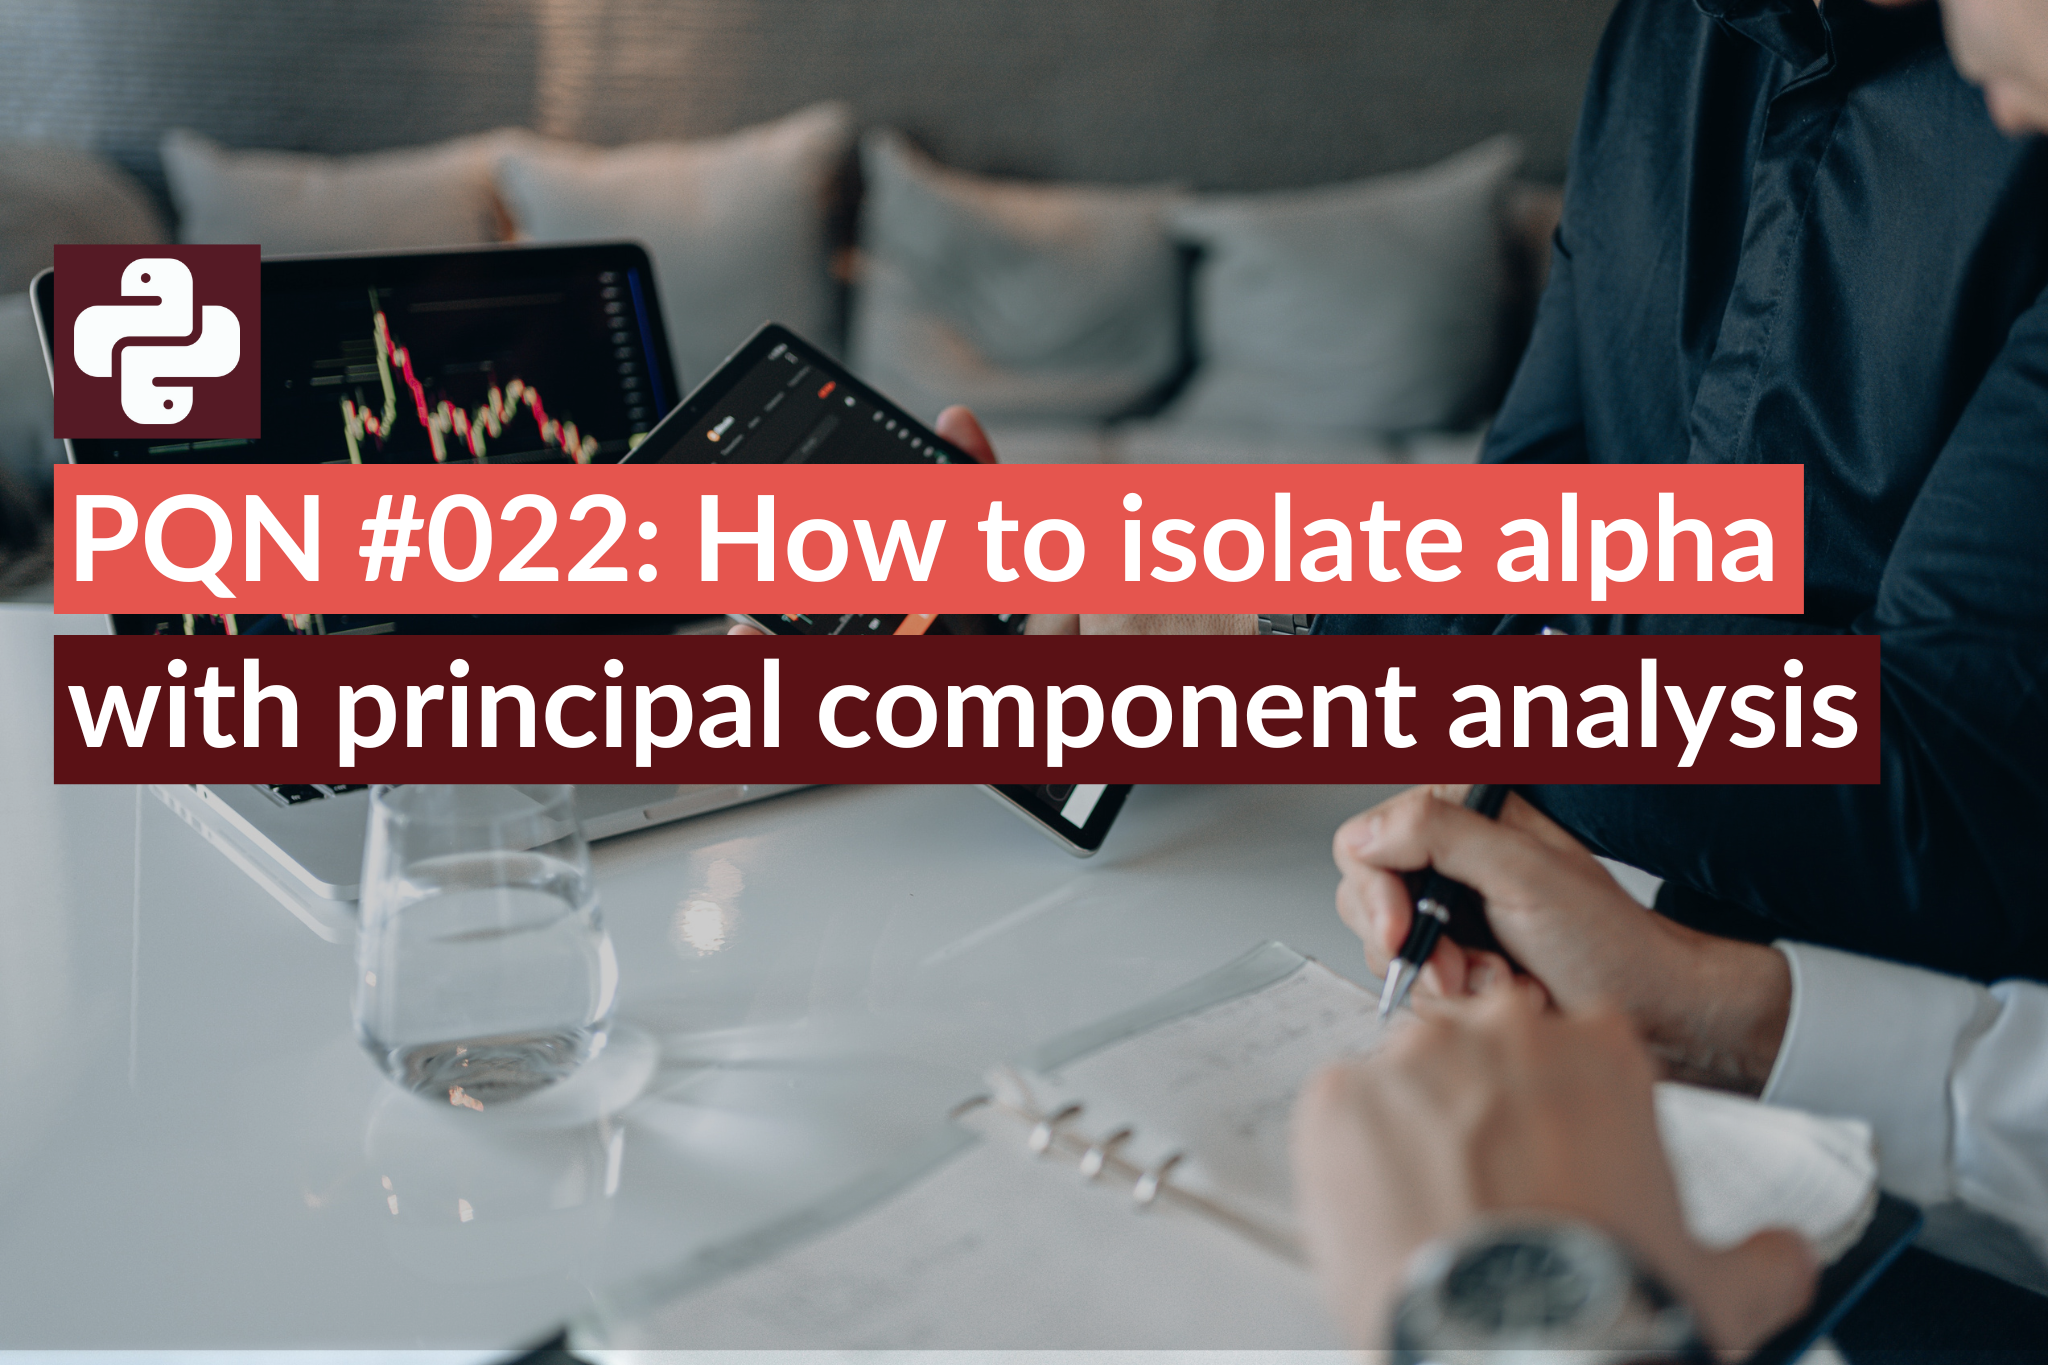 PQN #022: How to isolate alpha with principal component analysis.